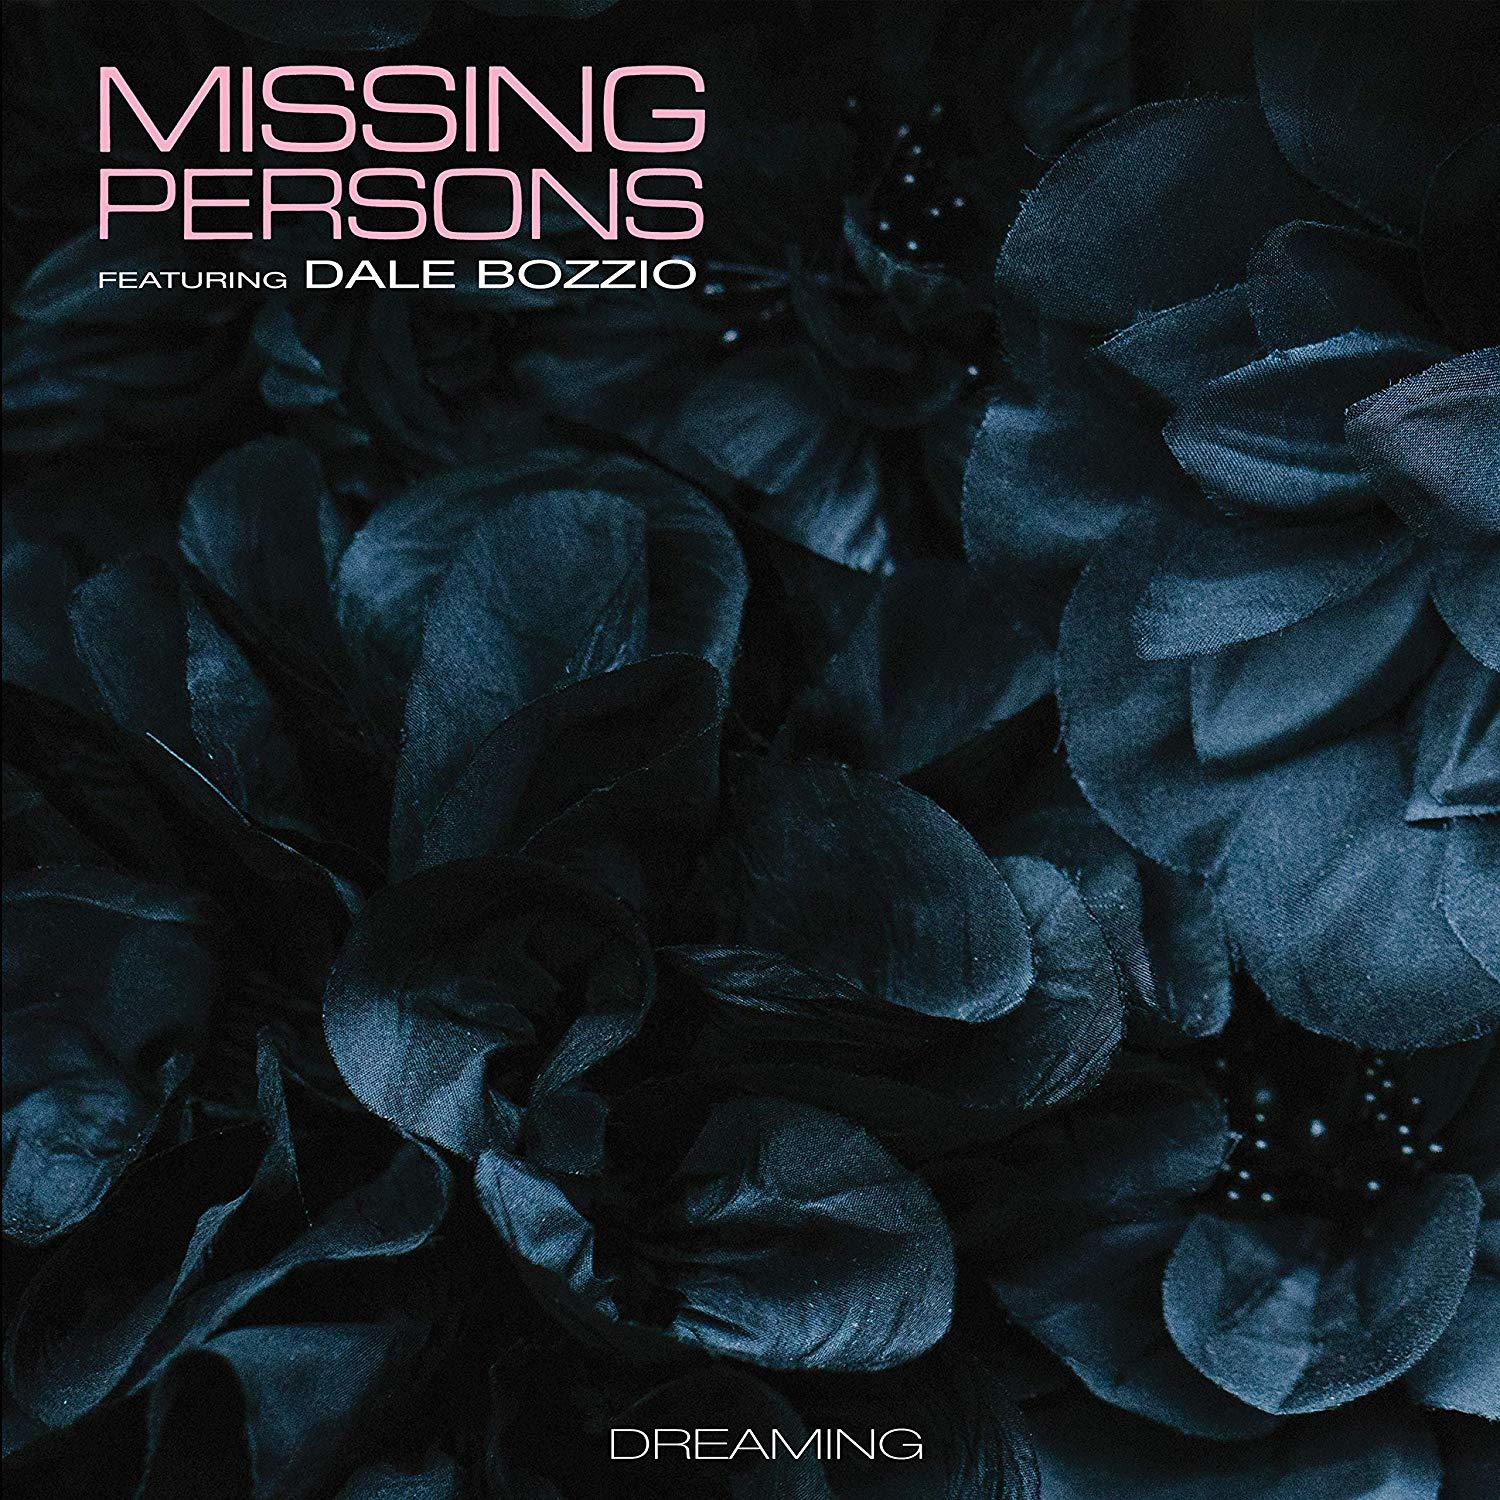 MISSING PERSONS FEAT. DALE DREAMING - BOZZIO (CD) 